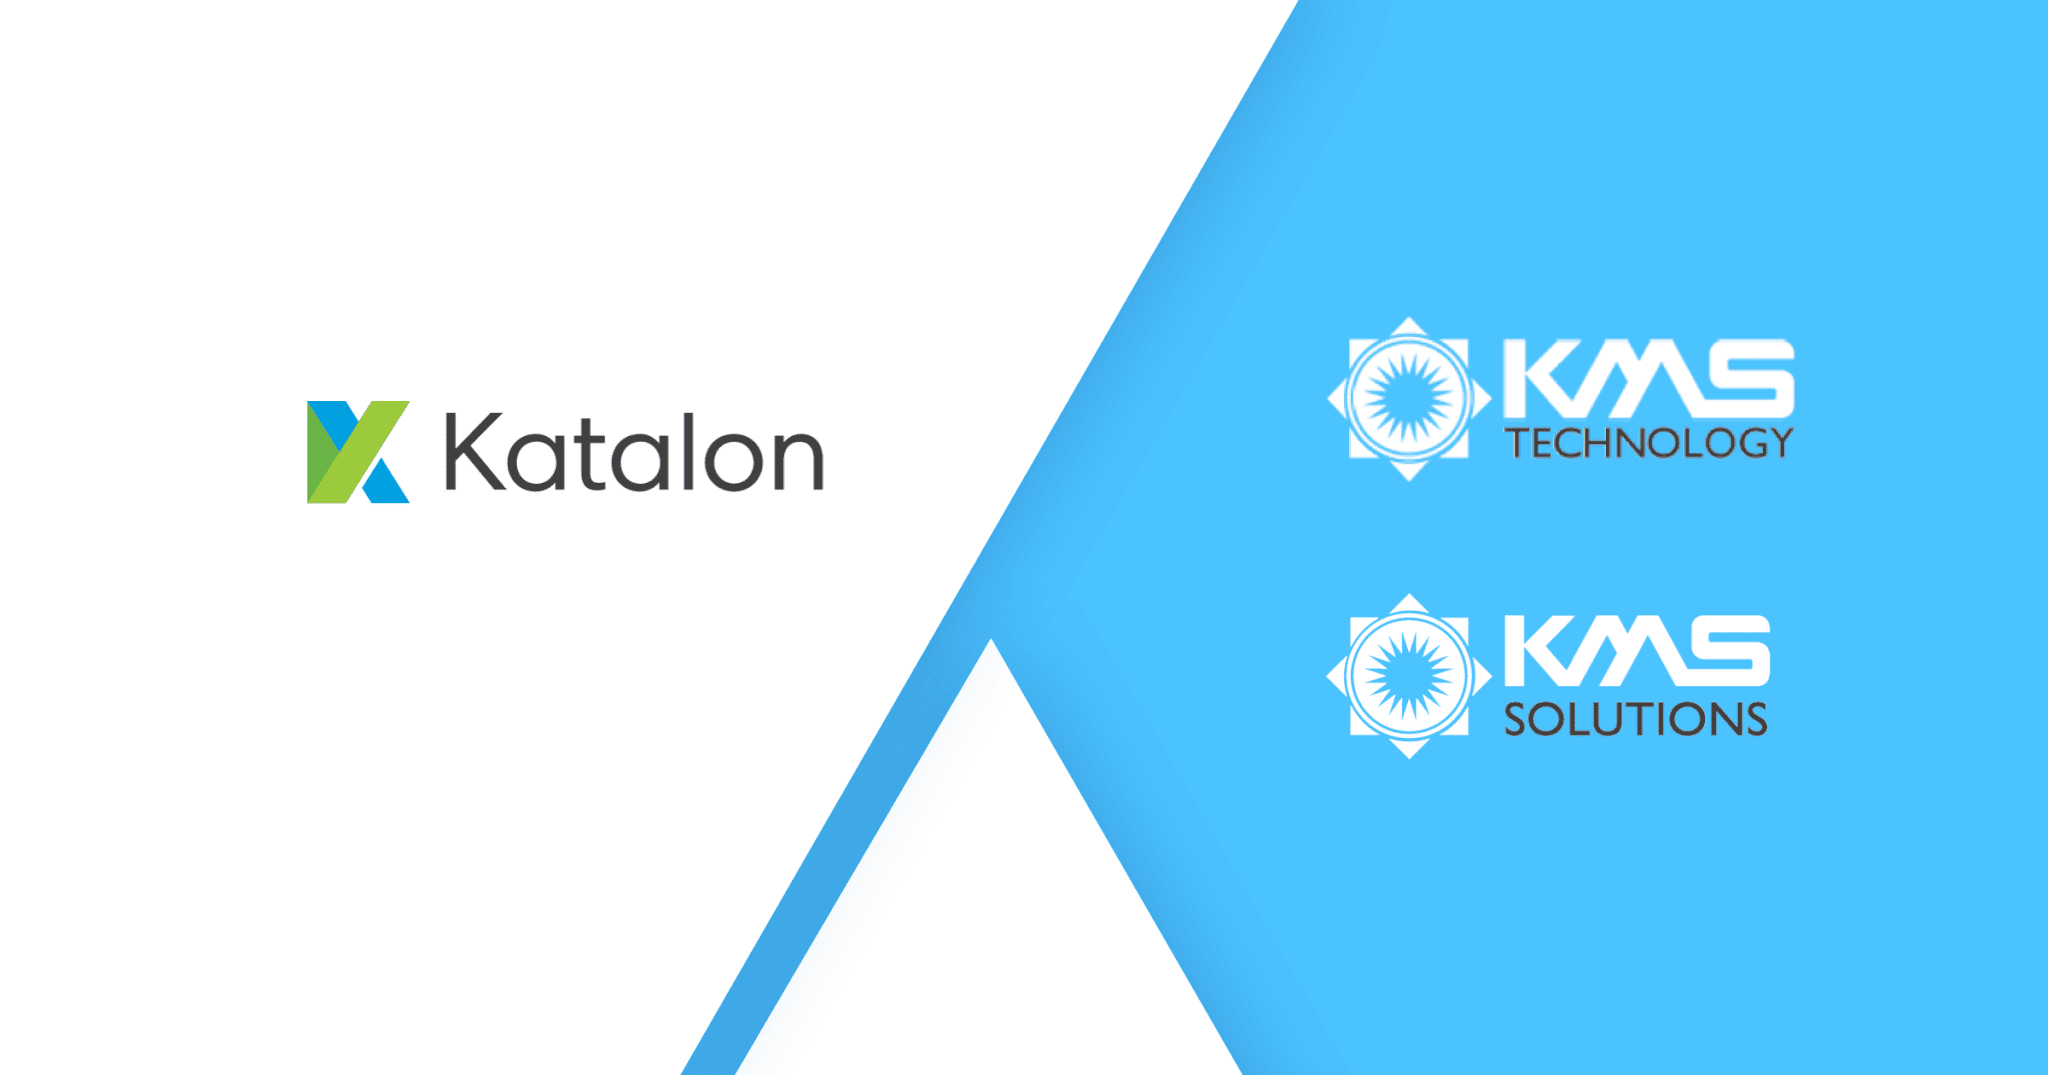 Katalon Announces Partnership Program to Offer Expanded Services to Their Customers